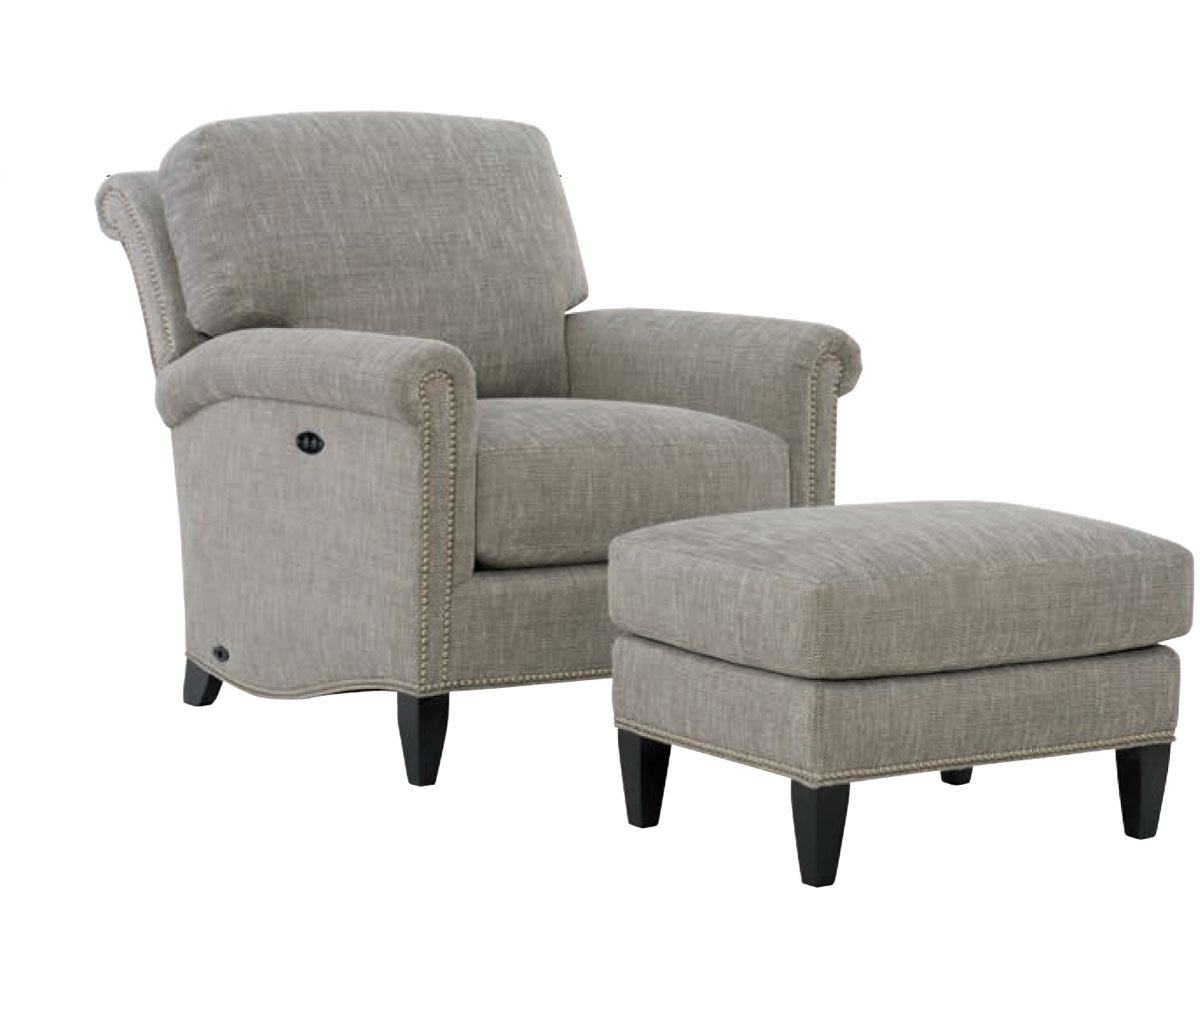 Wesley Hall 564 Gentry Tilt Back Chair and 564-26 Gentry Ottoman